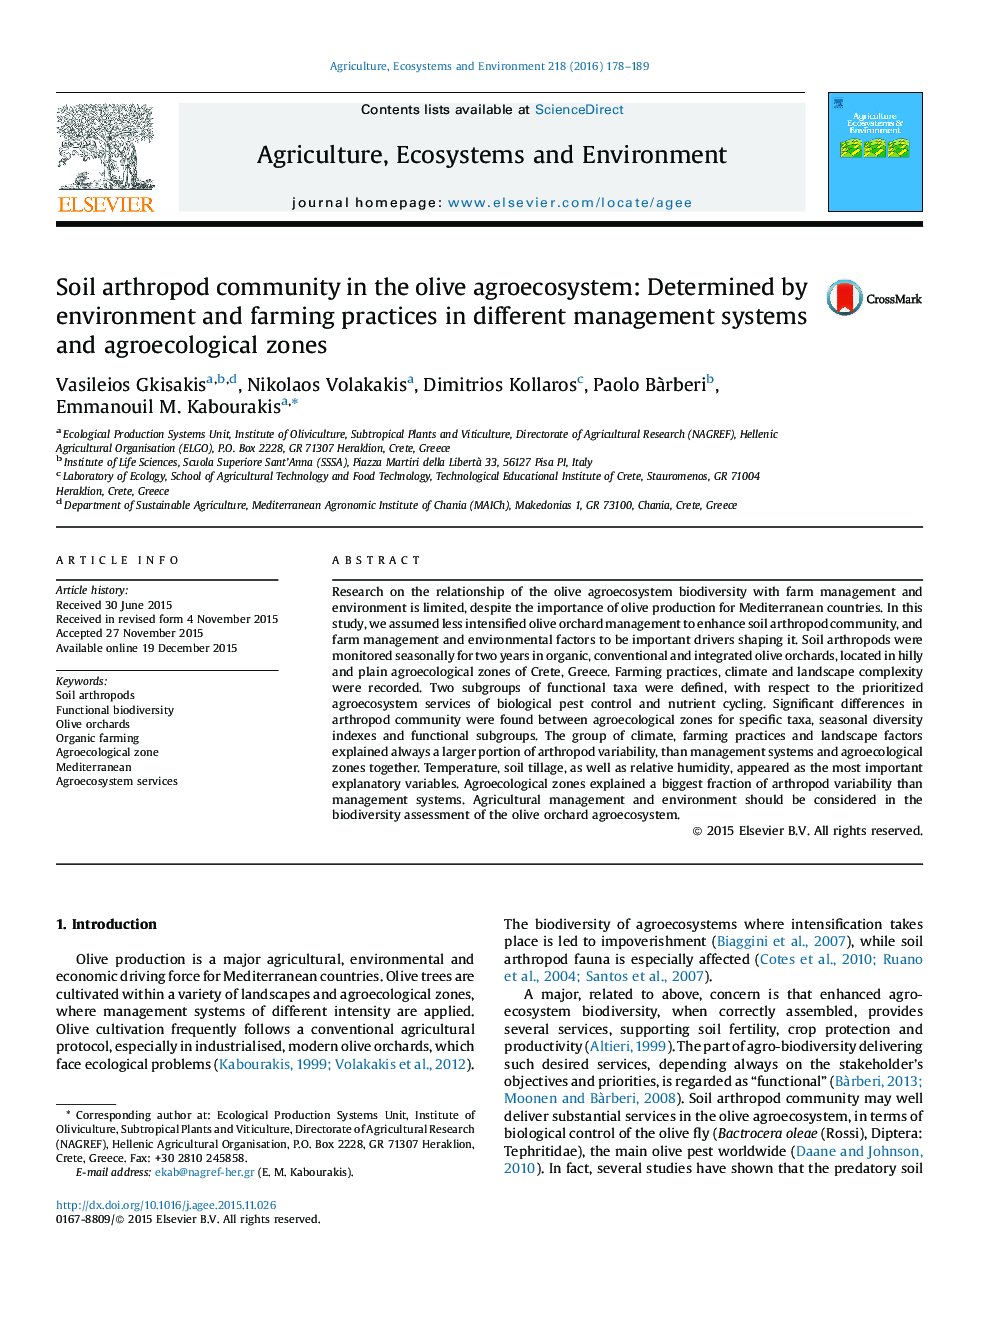 Soil arthropod community in the olive agroecosystem: Determined by environment and farming practices in different management systems and agroecological zones